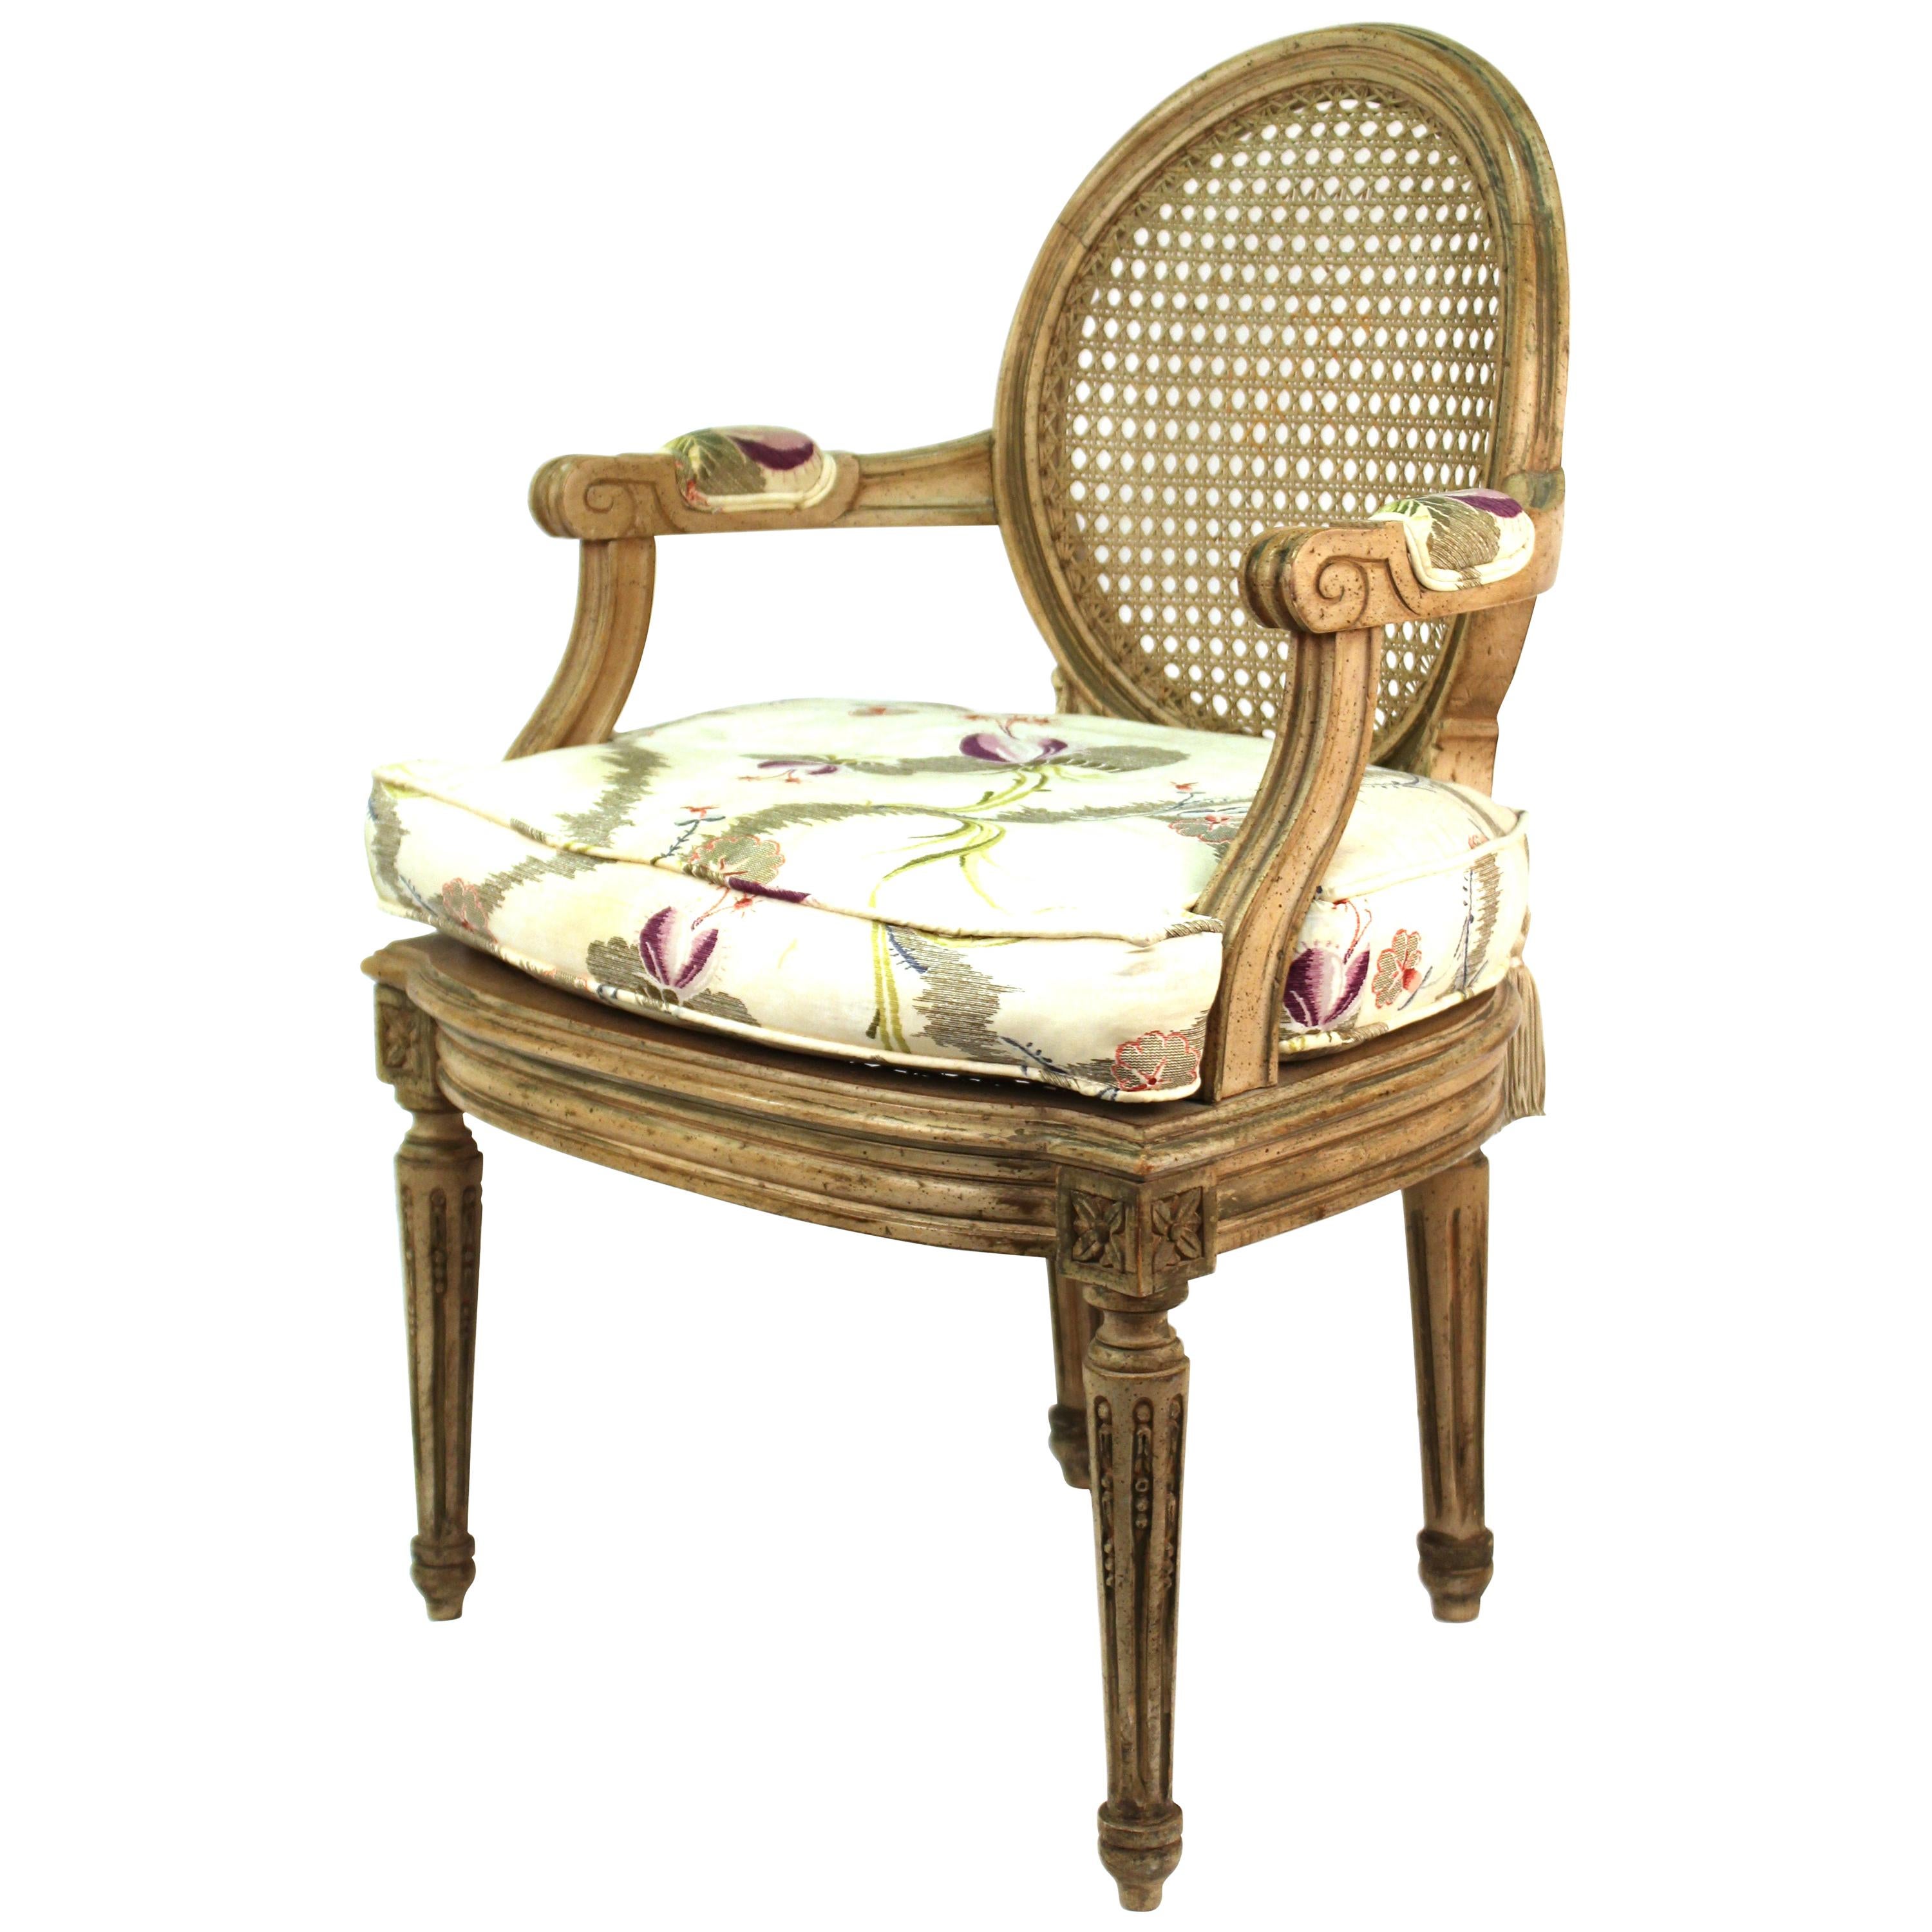 Louis XVI Style Diminutive Armchair with Caned Seat and Back